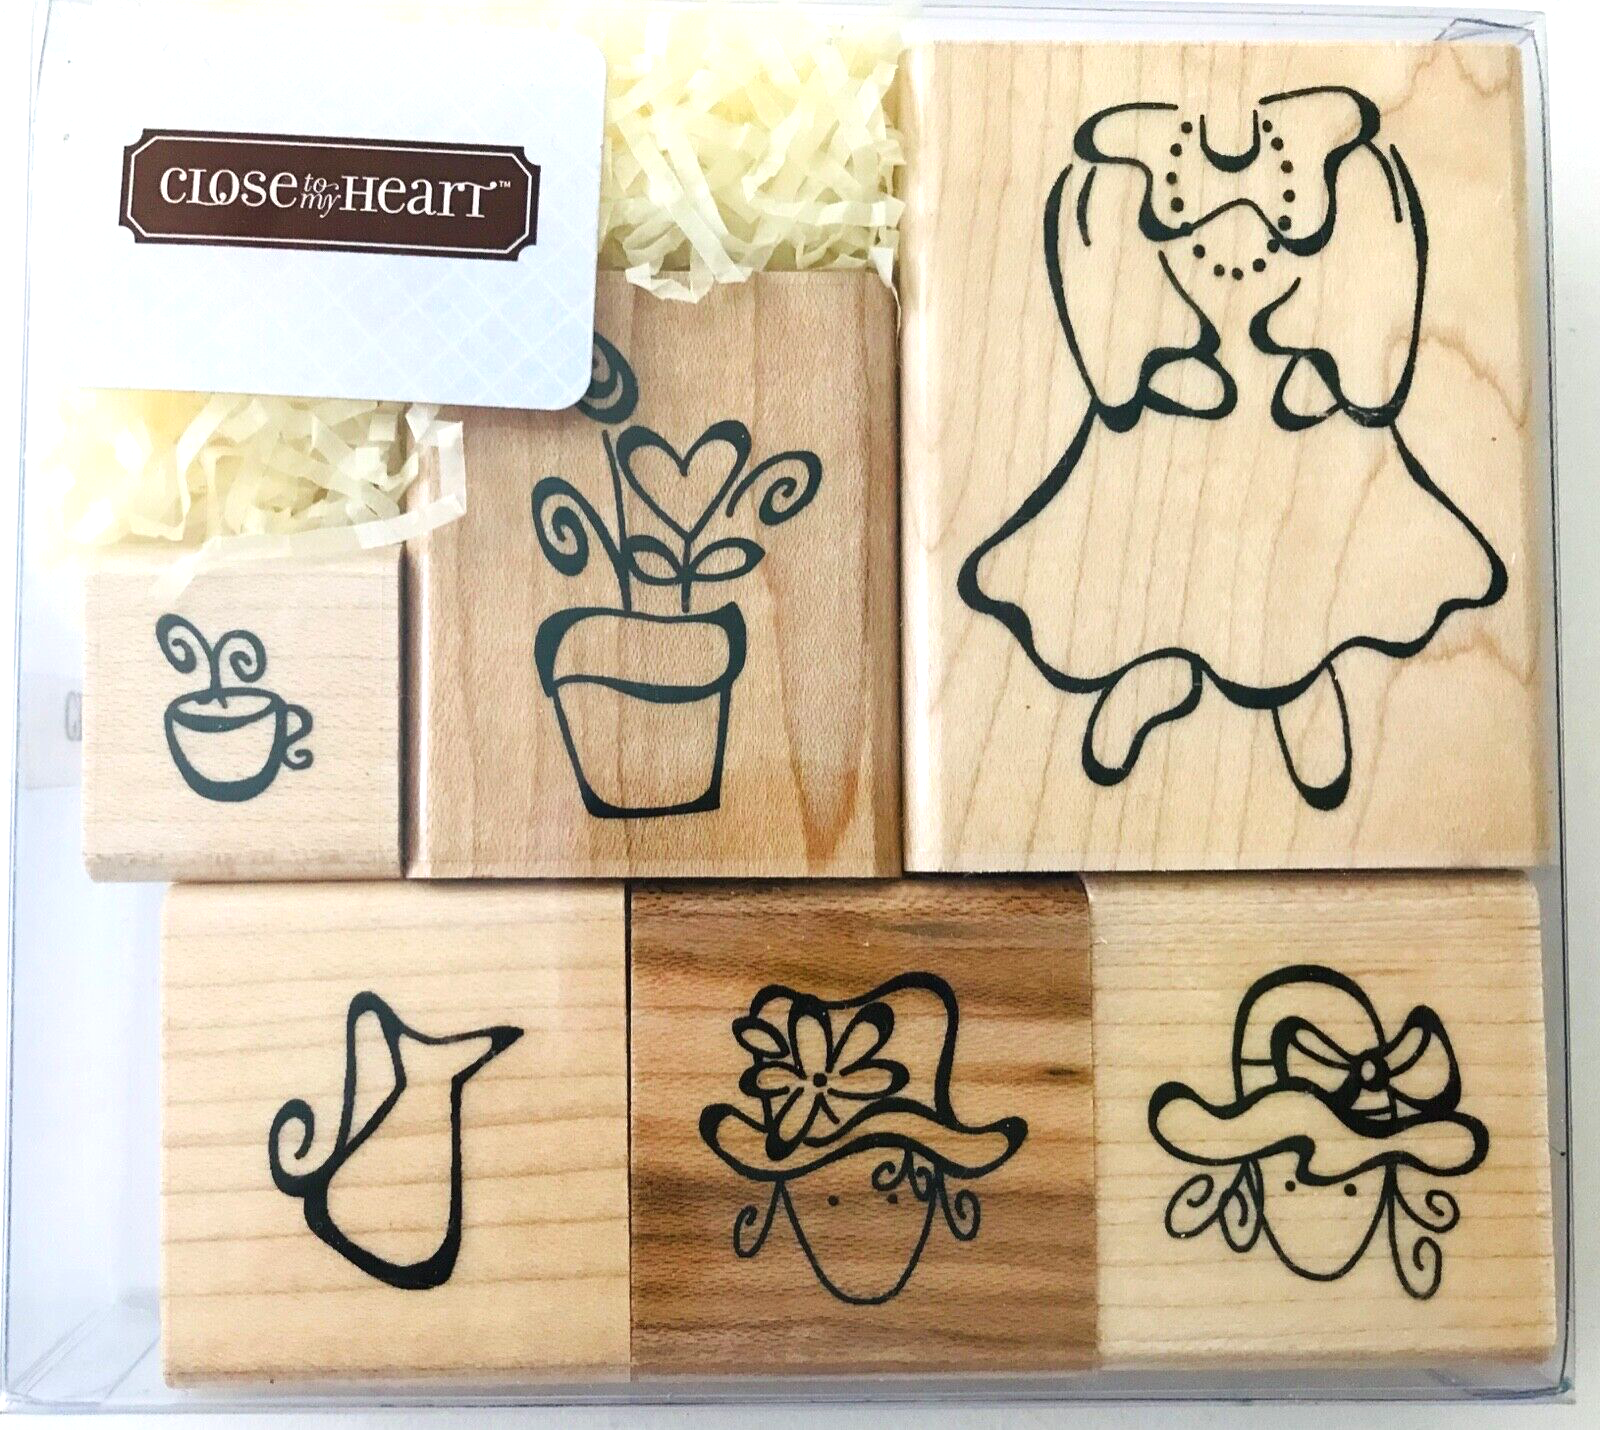 Garden Party 6 Rubber Stamps Hats Flowers Dress Close To My Heart S524 New NRFB - $6.89